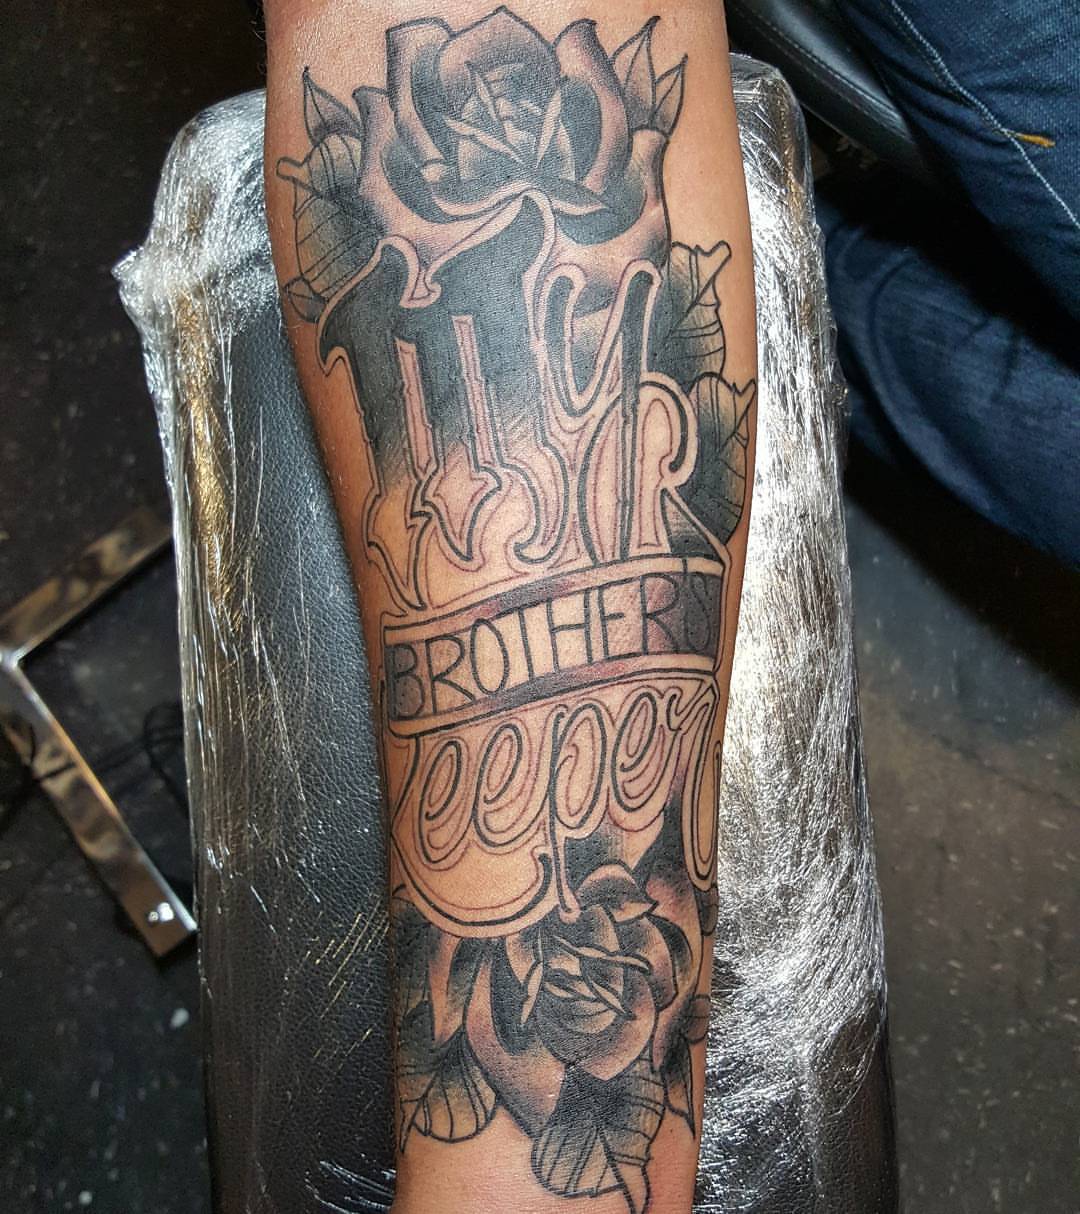 19 My Brothers Keeper Tattoo With Powerful Meanings  TattoosWin